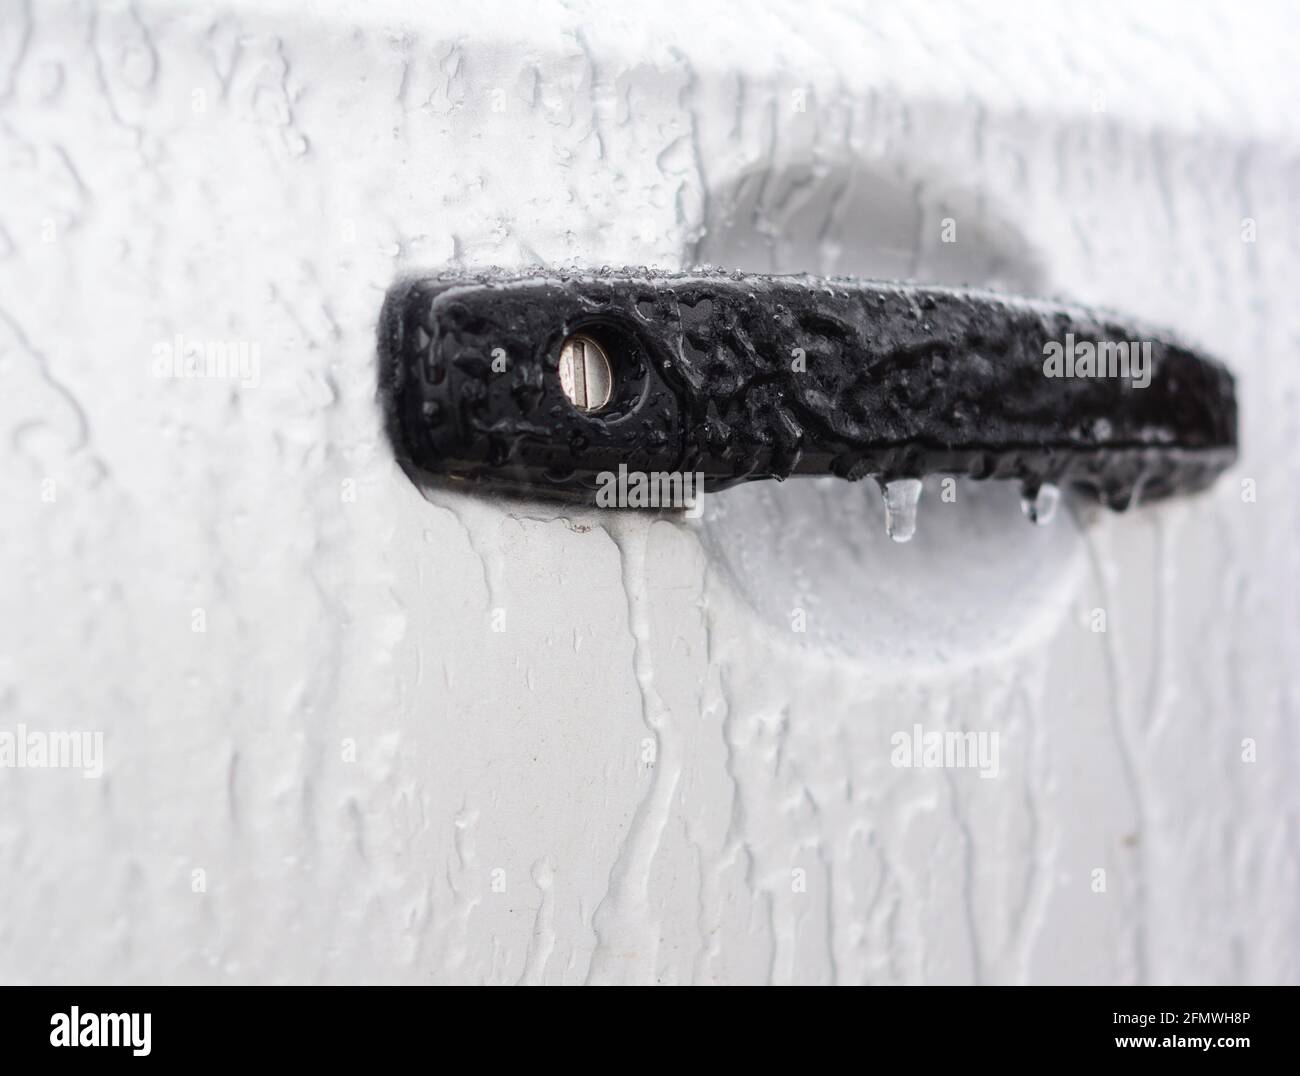 Ice damage to a car lock. How to de-ice the car and open, unlock frozen car doors. Stock Photo